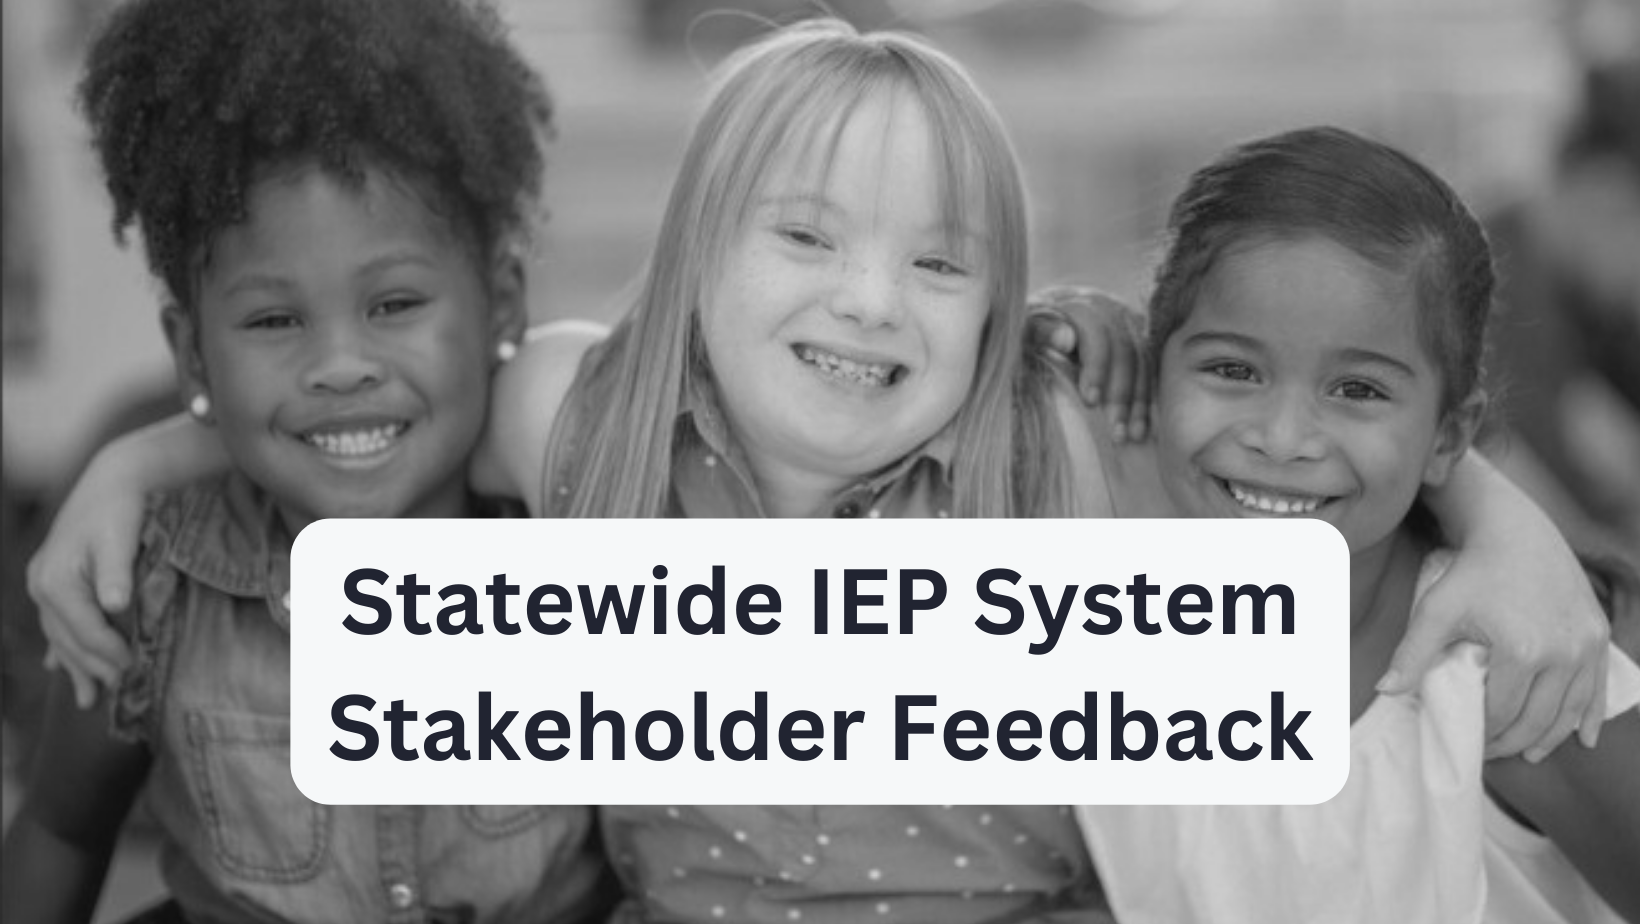 Statewide IEP System Stakeholder Feedback